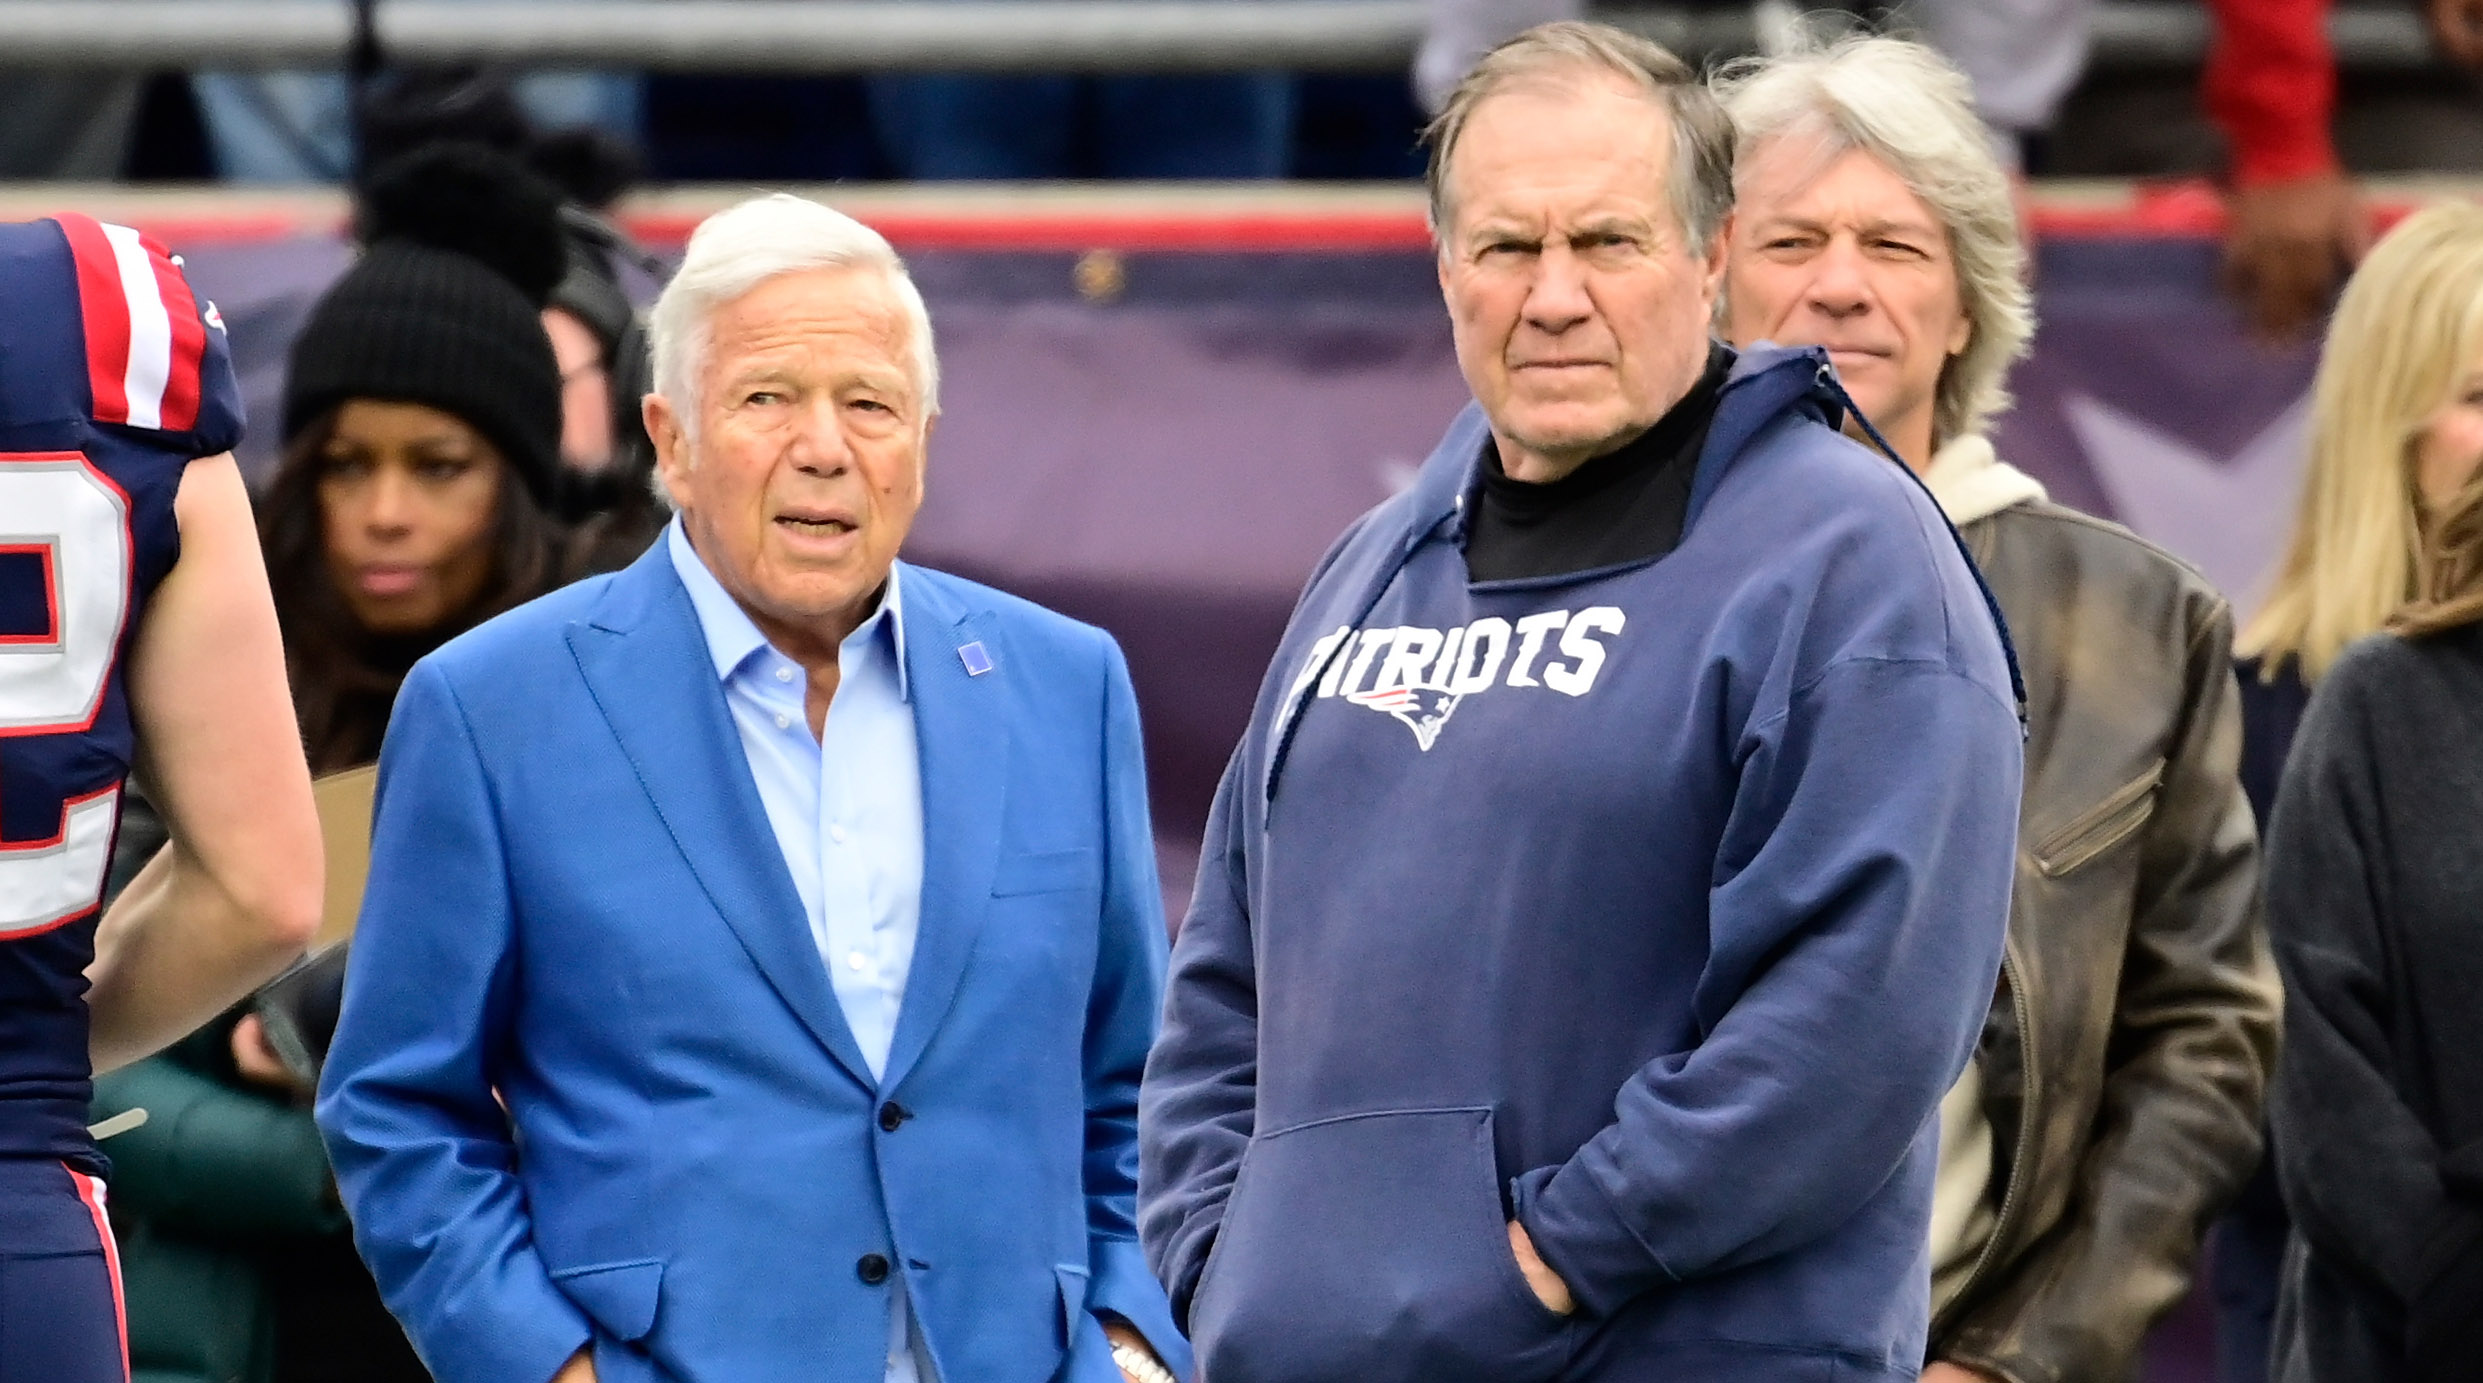 New England Patriots head coach Bill Belichick and Patriots owner Robert Kraft watch the field during warm-ups before a game against the Kansas City Chiefs.